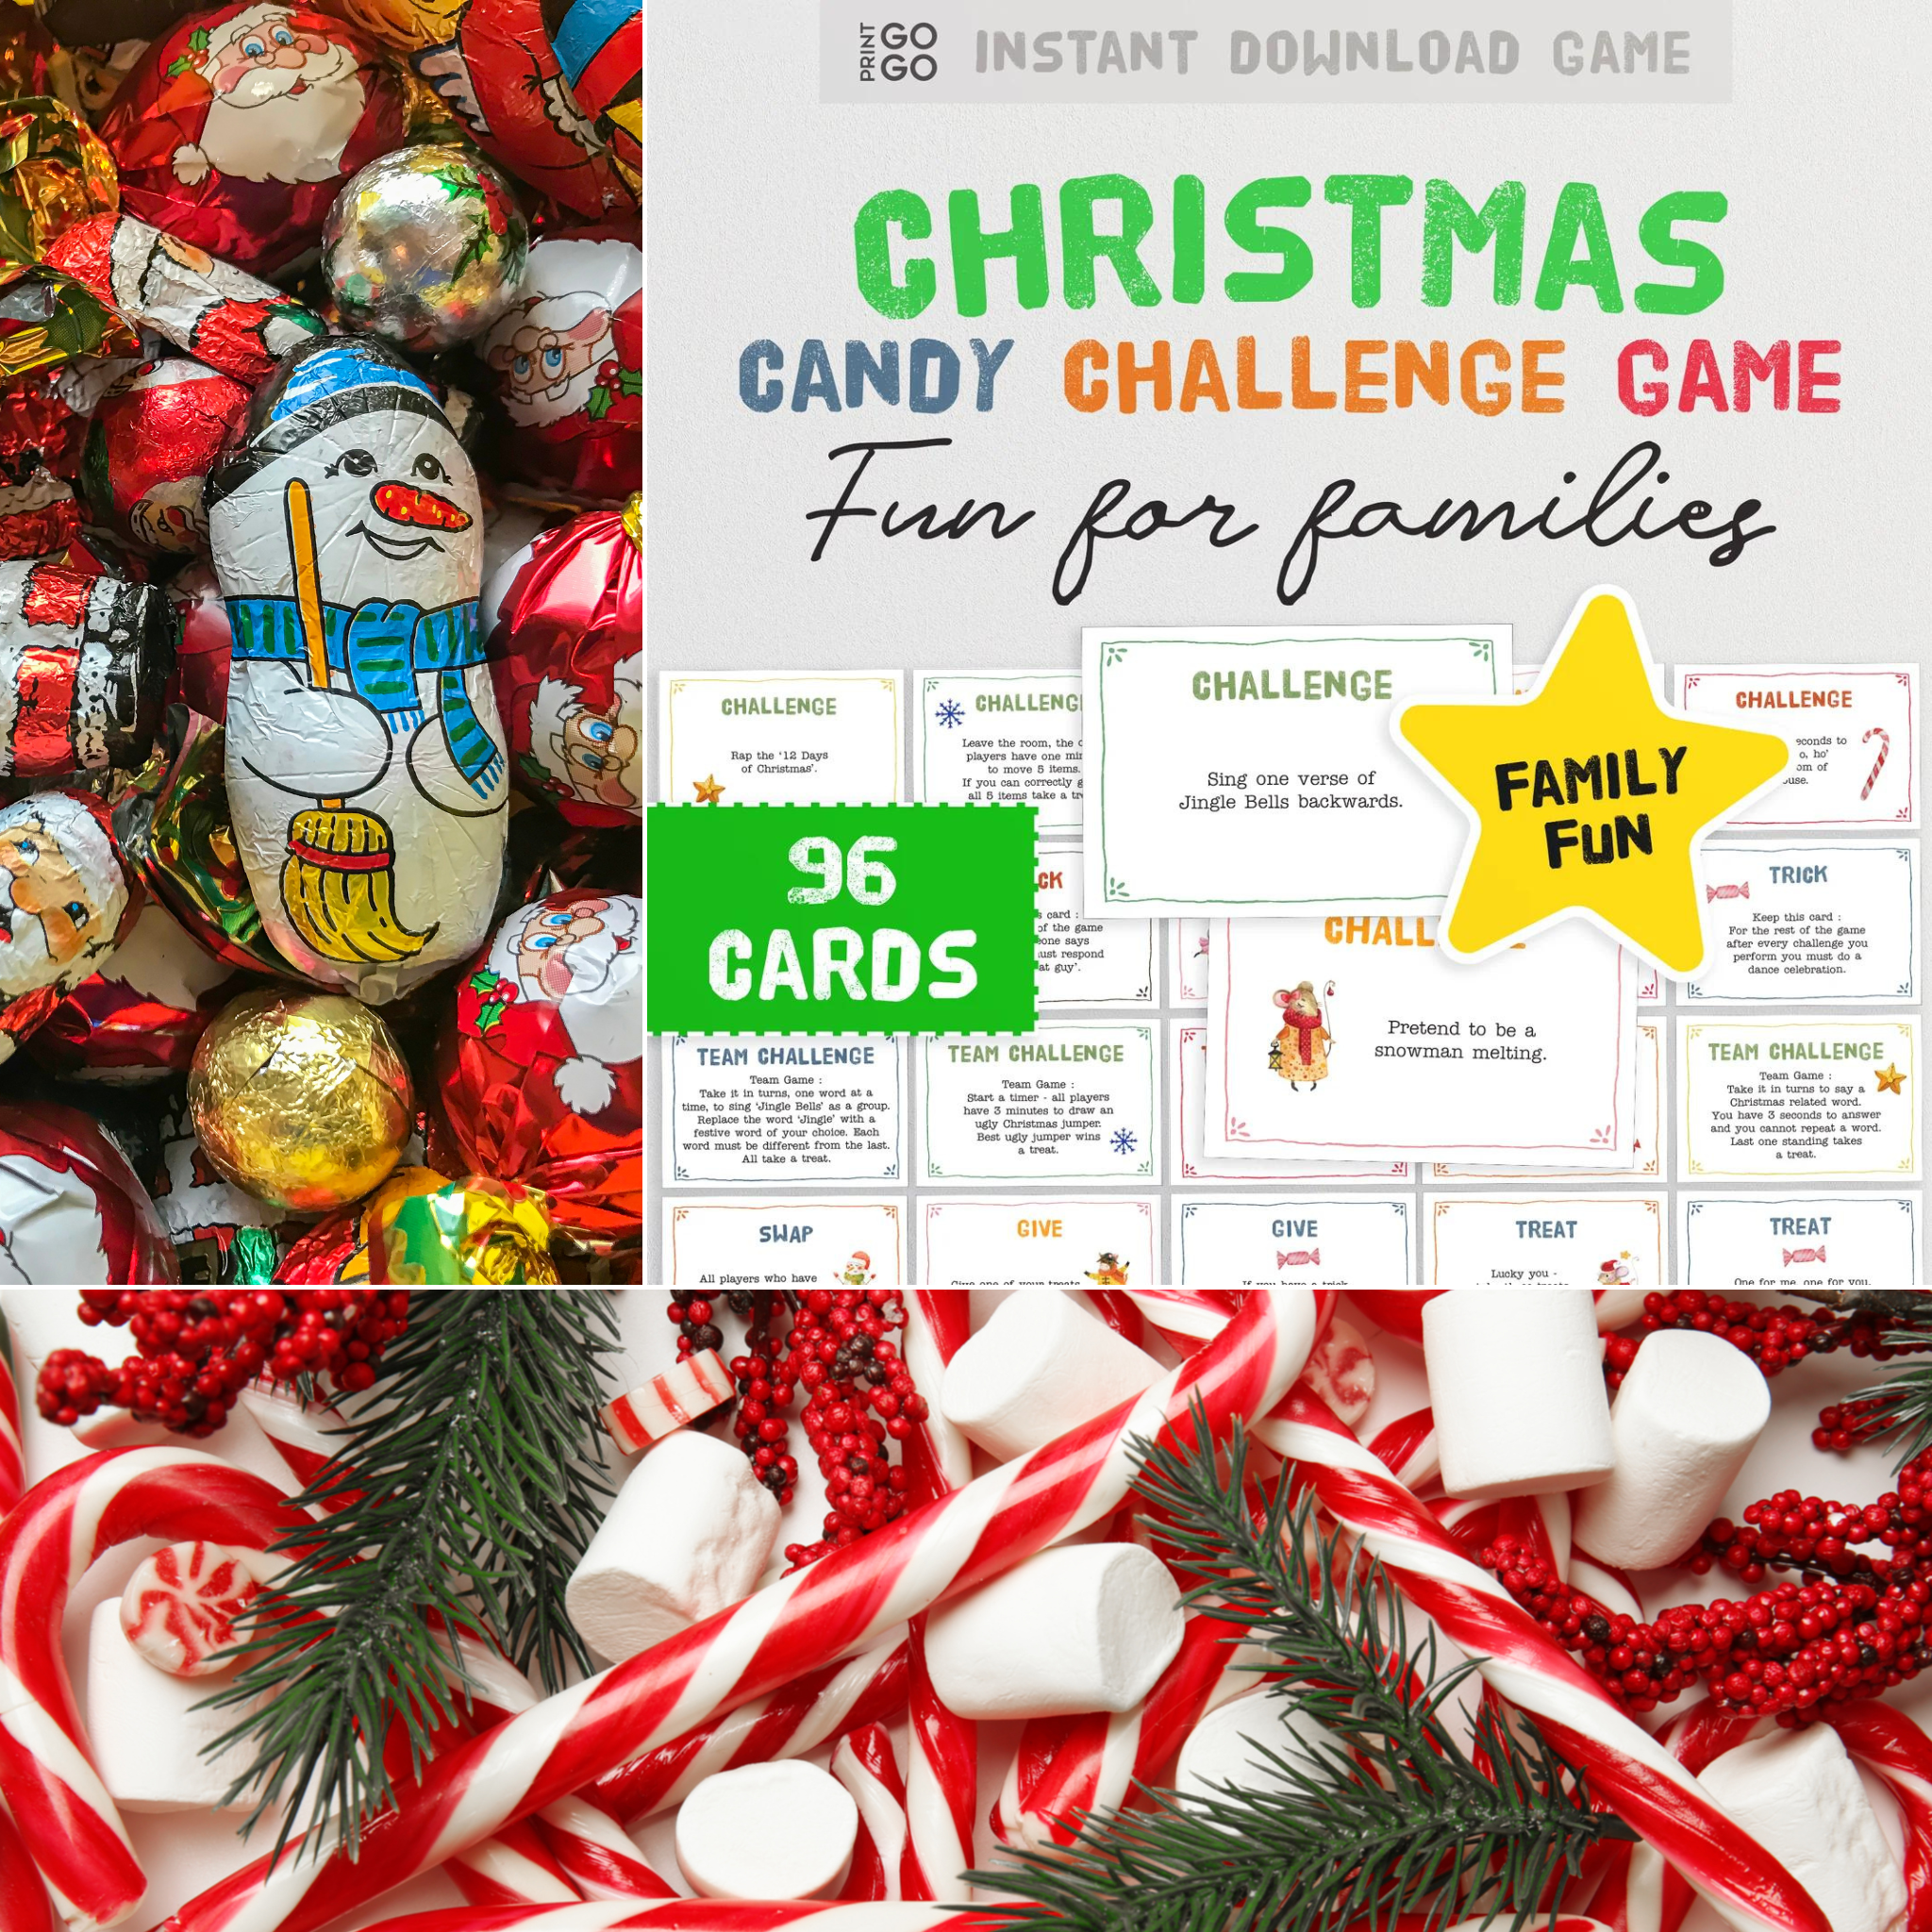 The Candy-licious Christmas Challenge Game for Kids!